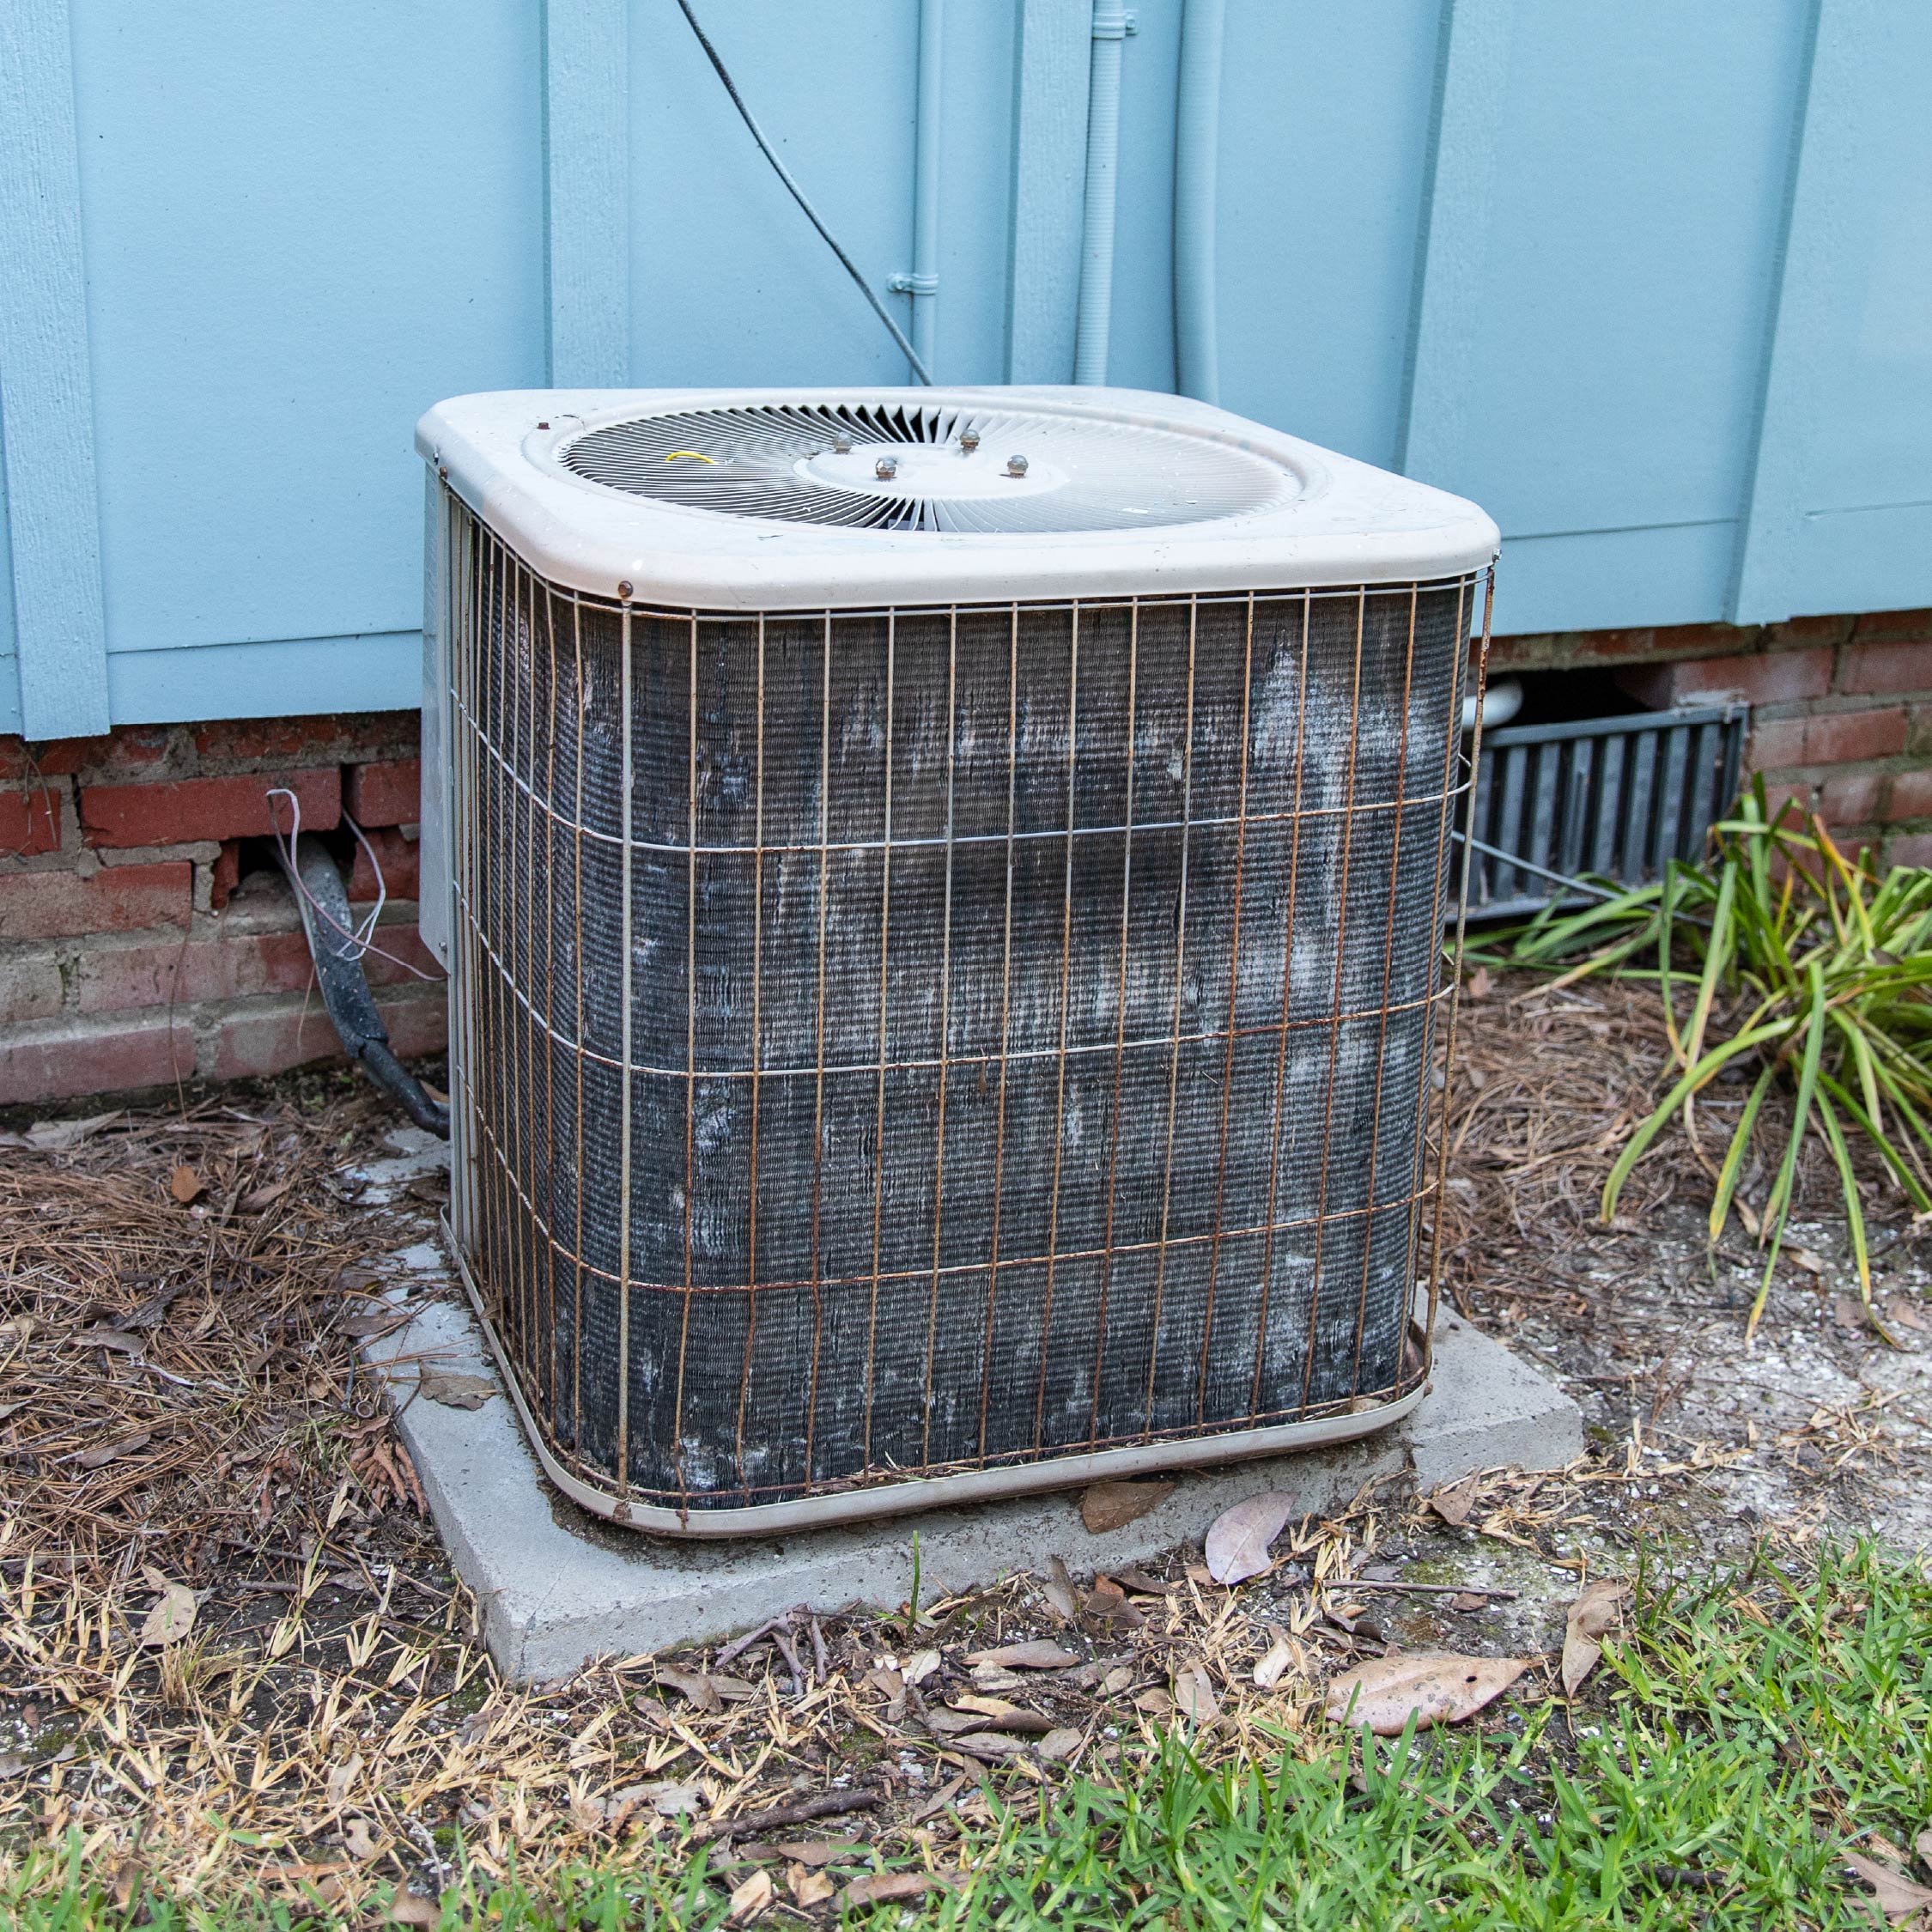 HVAC system that needs to be repaired.